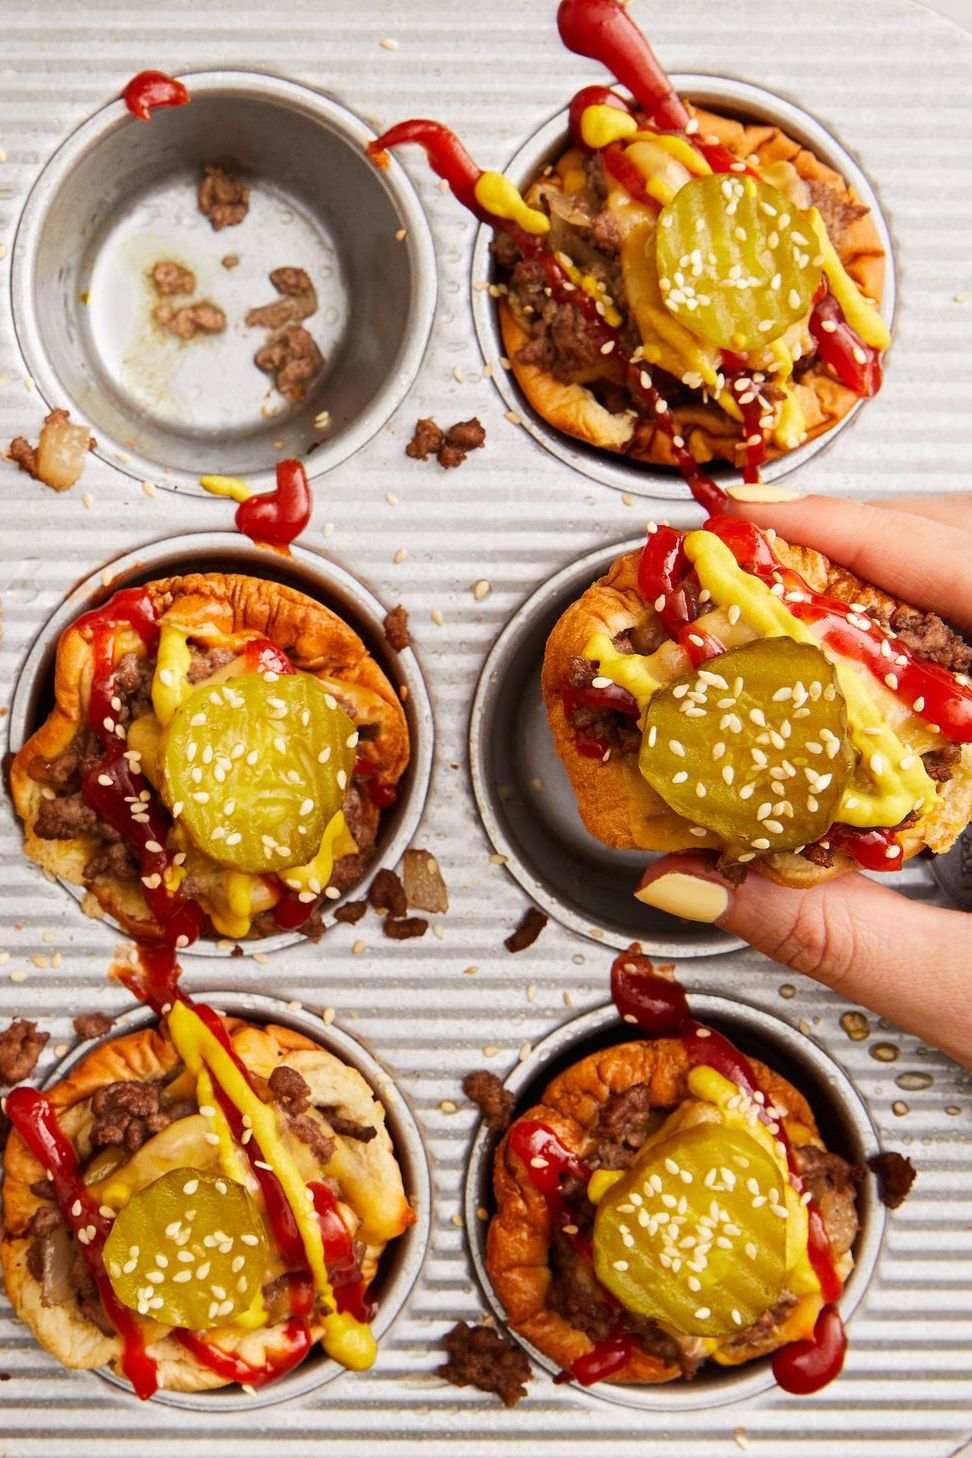 https://hips.hearstapps.com/hmg-prod/images/delish-cheeseburger-cups-horizontal-1657813771.jpg?crop=0.9918367346938776xw:1xh;center,top&resize=980:*